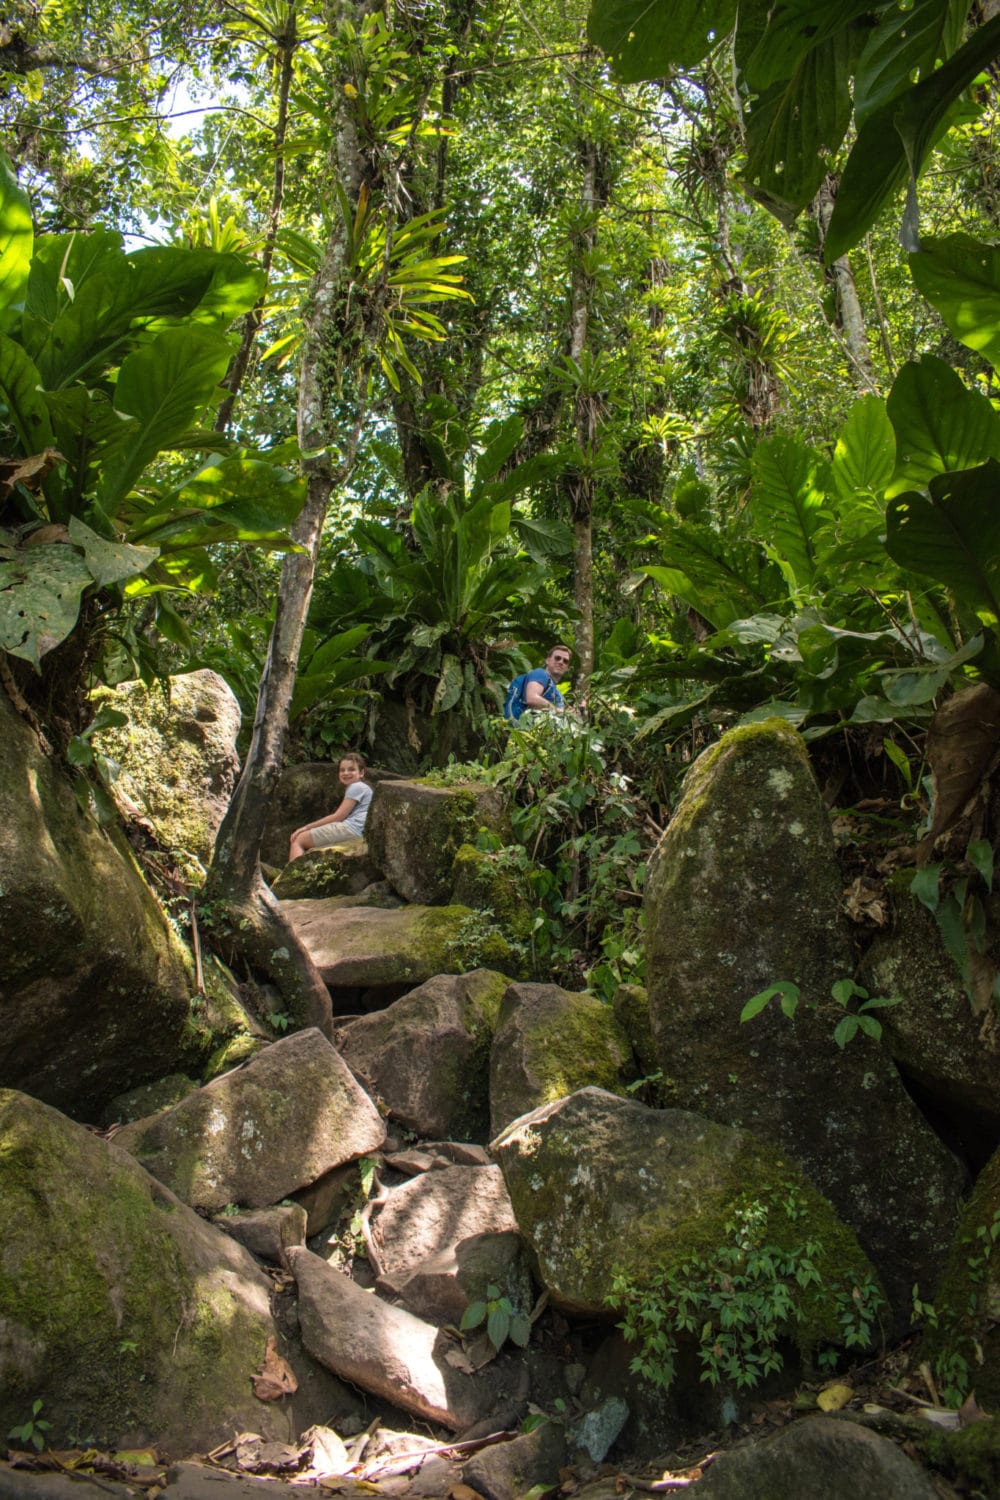 On the trail near the top of Gros Piton